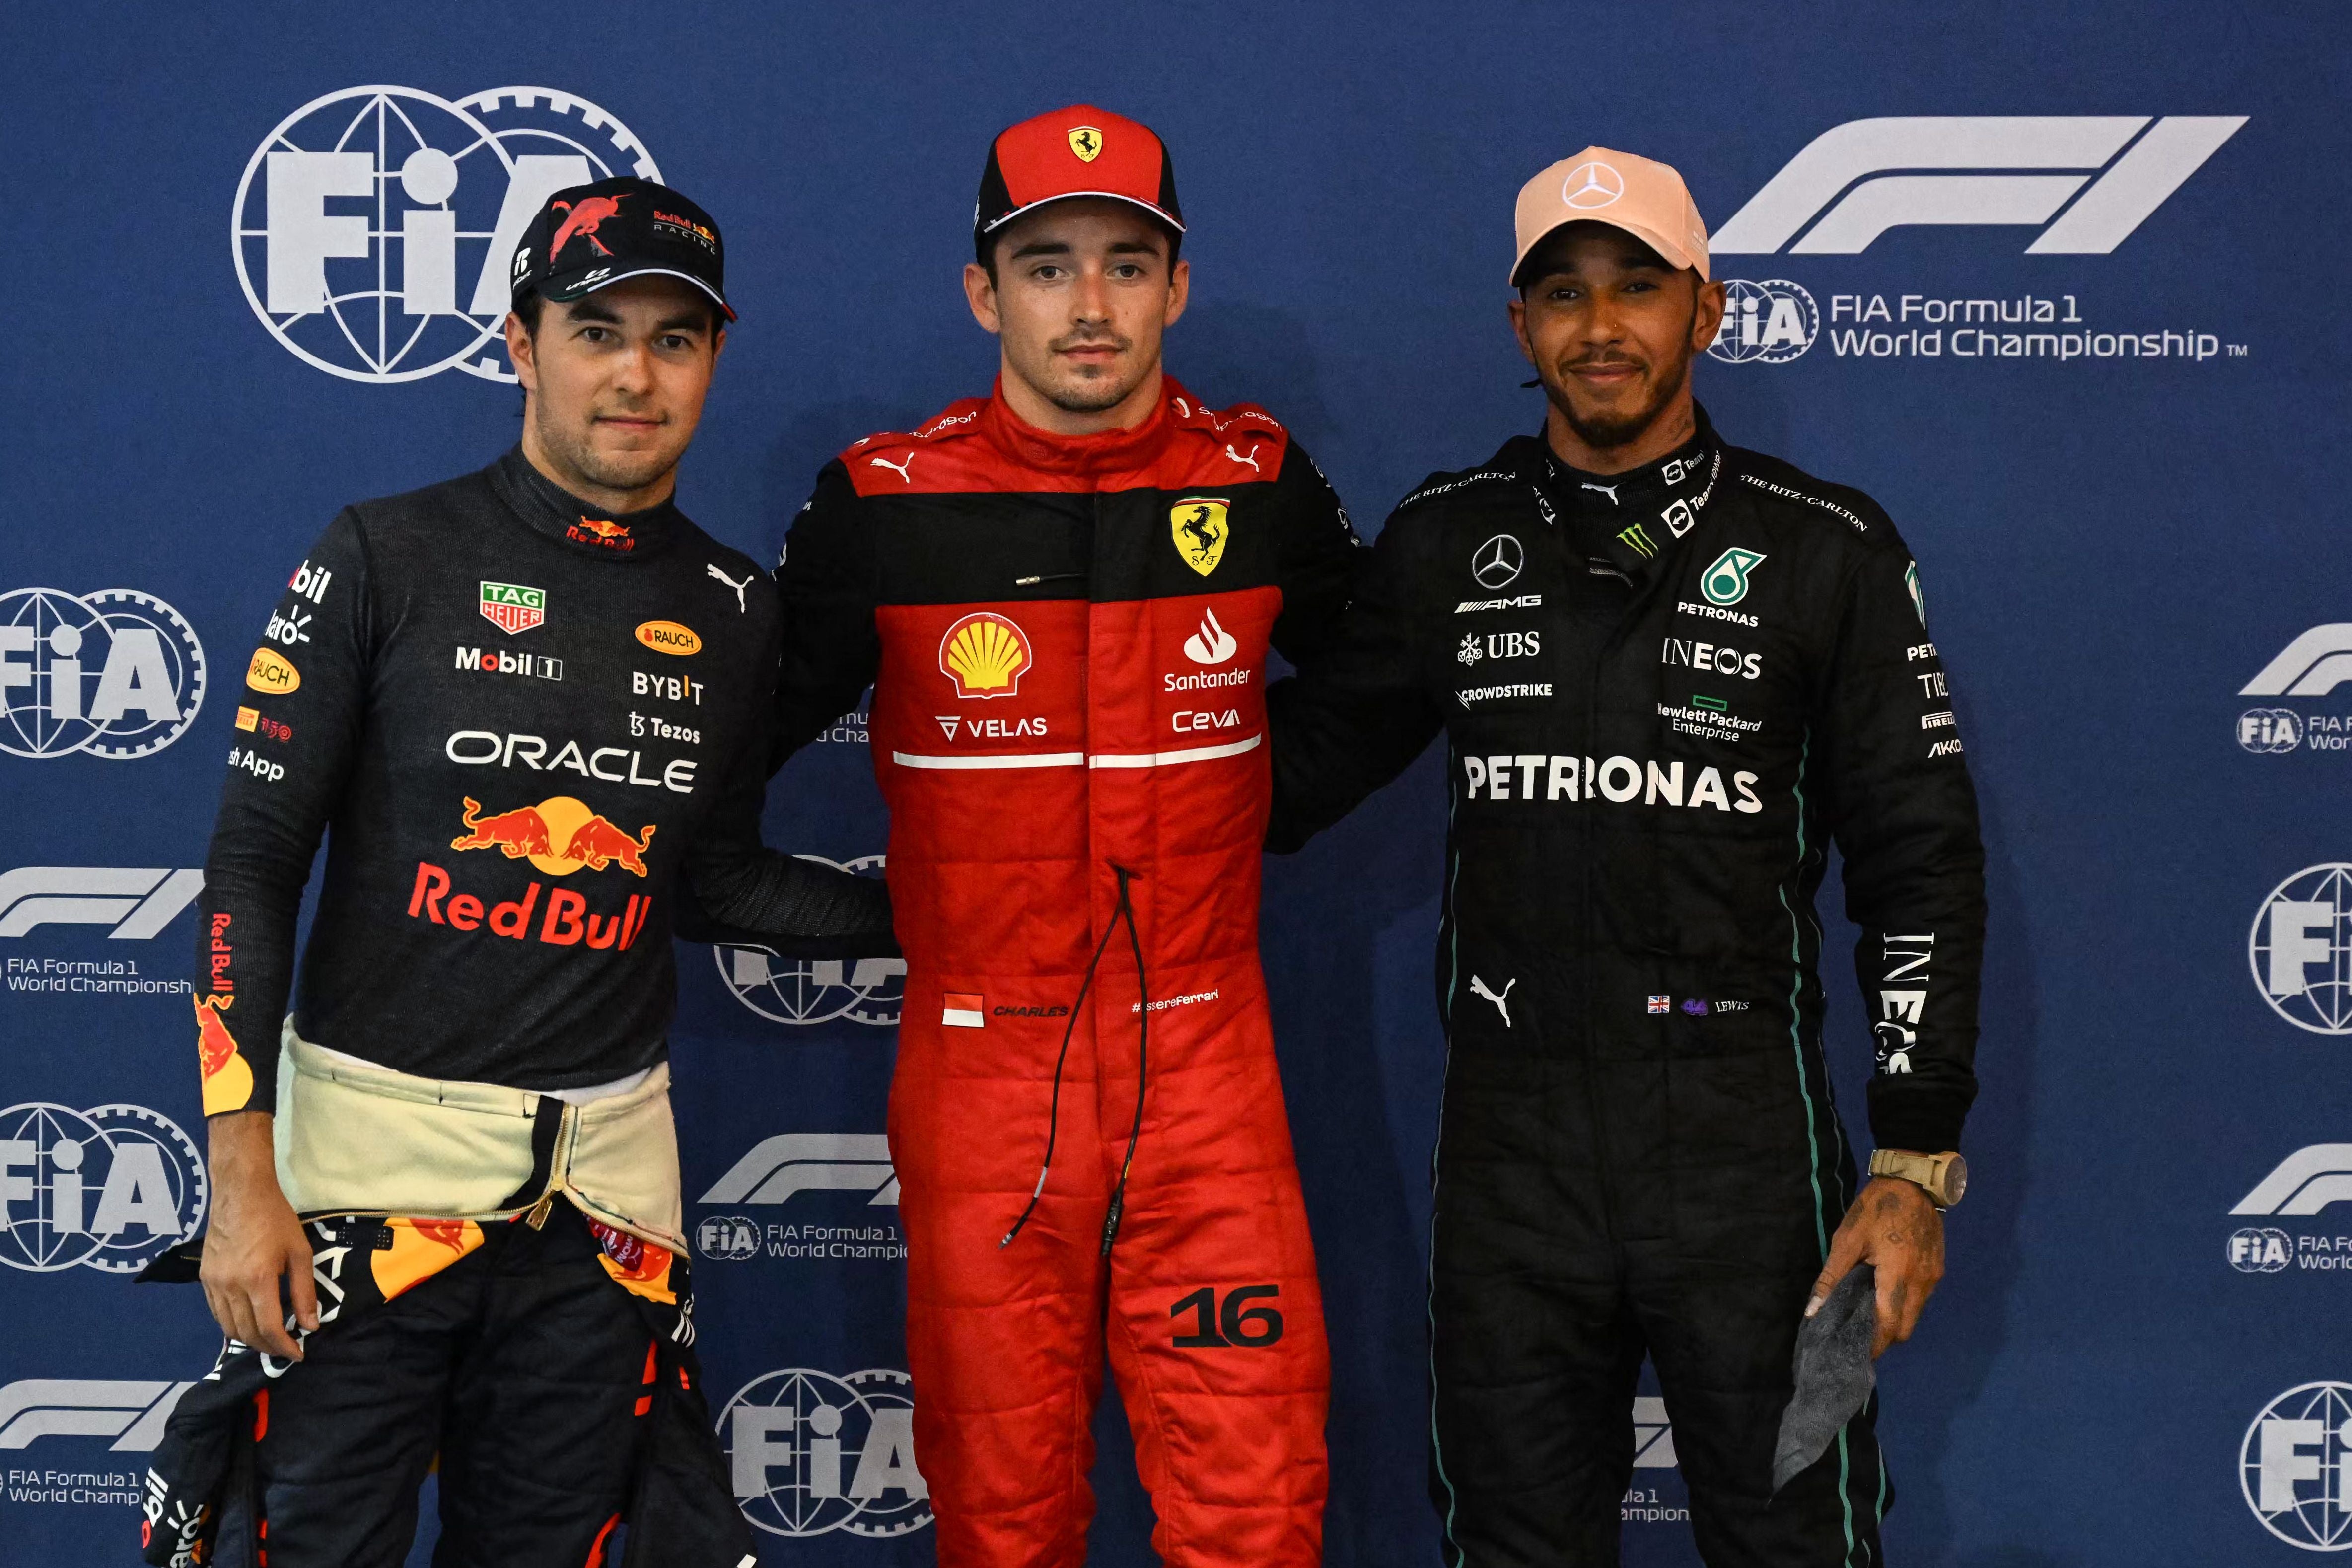 Charles Leclerc came home first with Sergio Perez second and Lewis Hamilton third